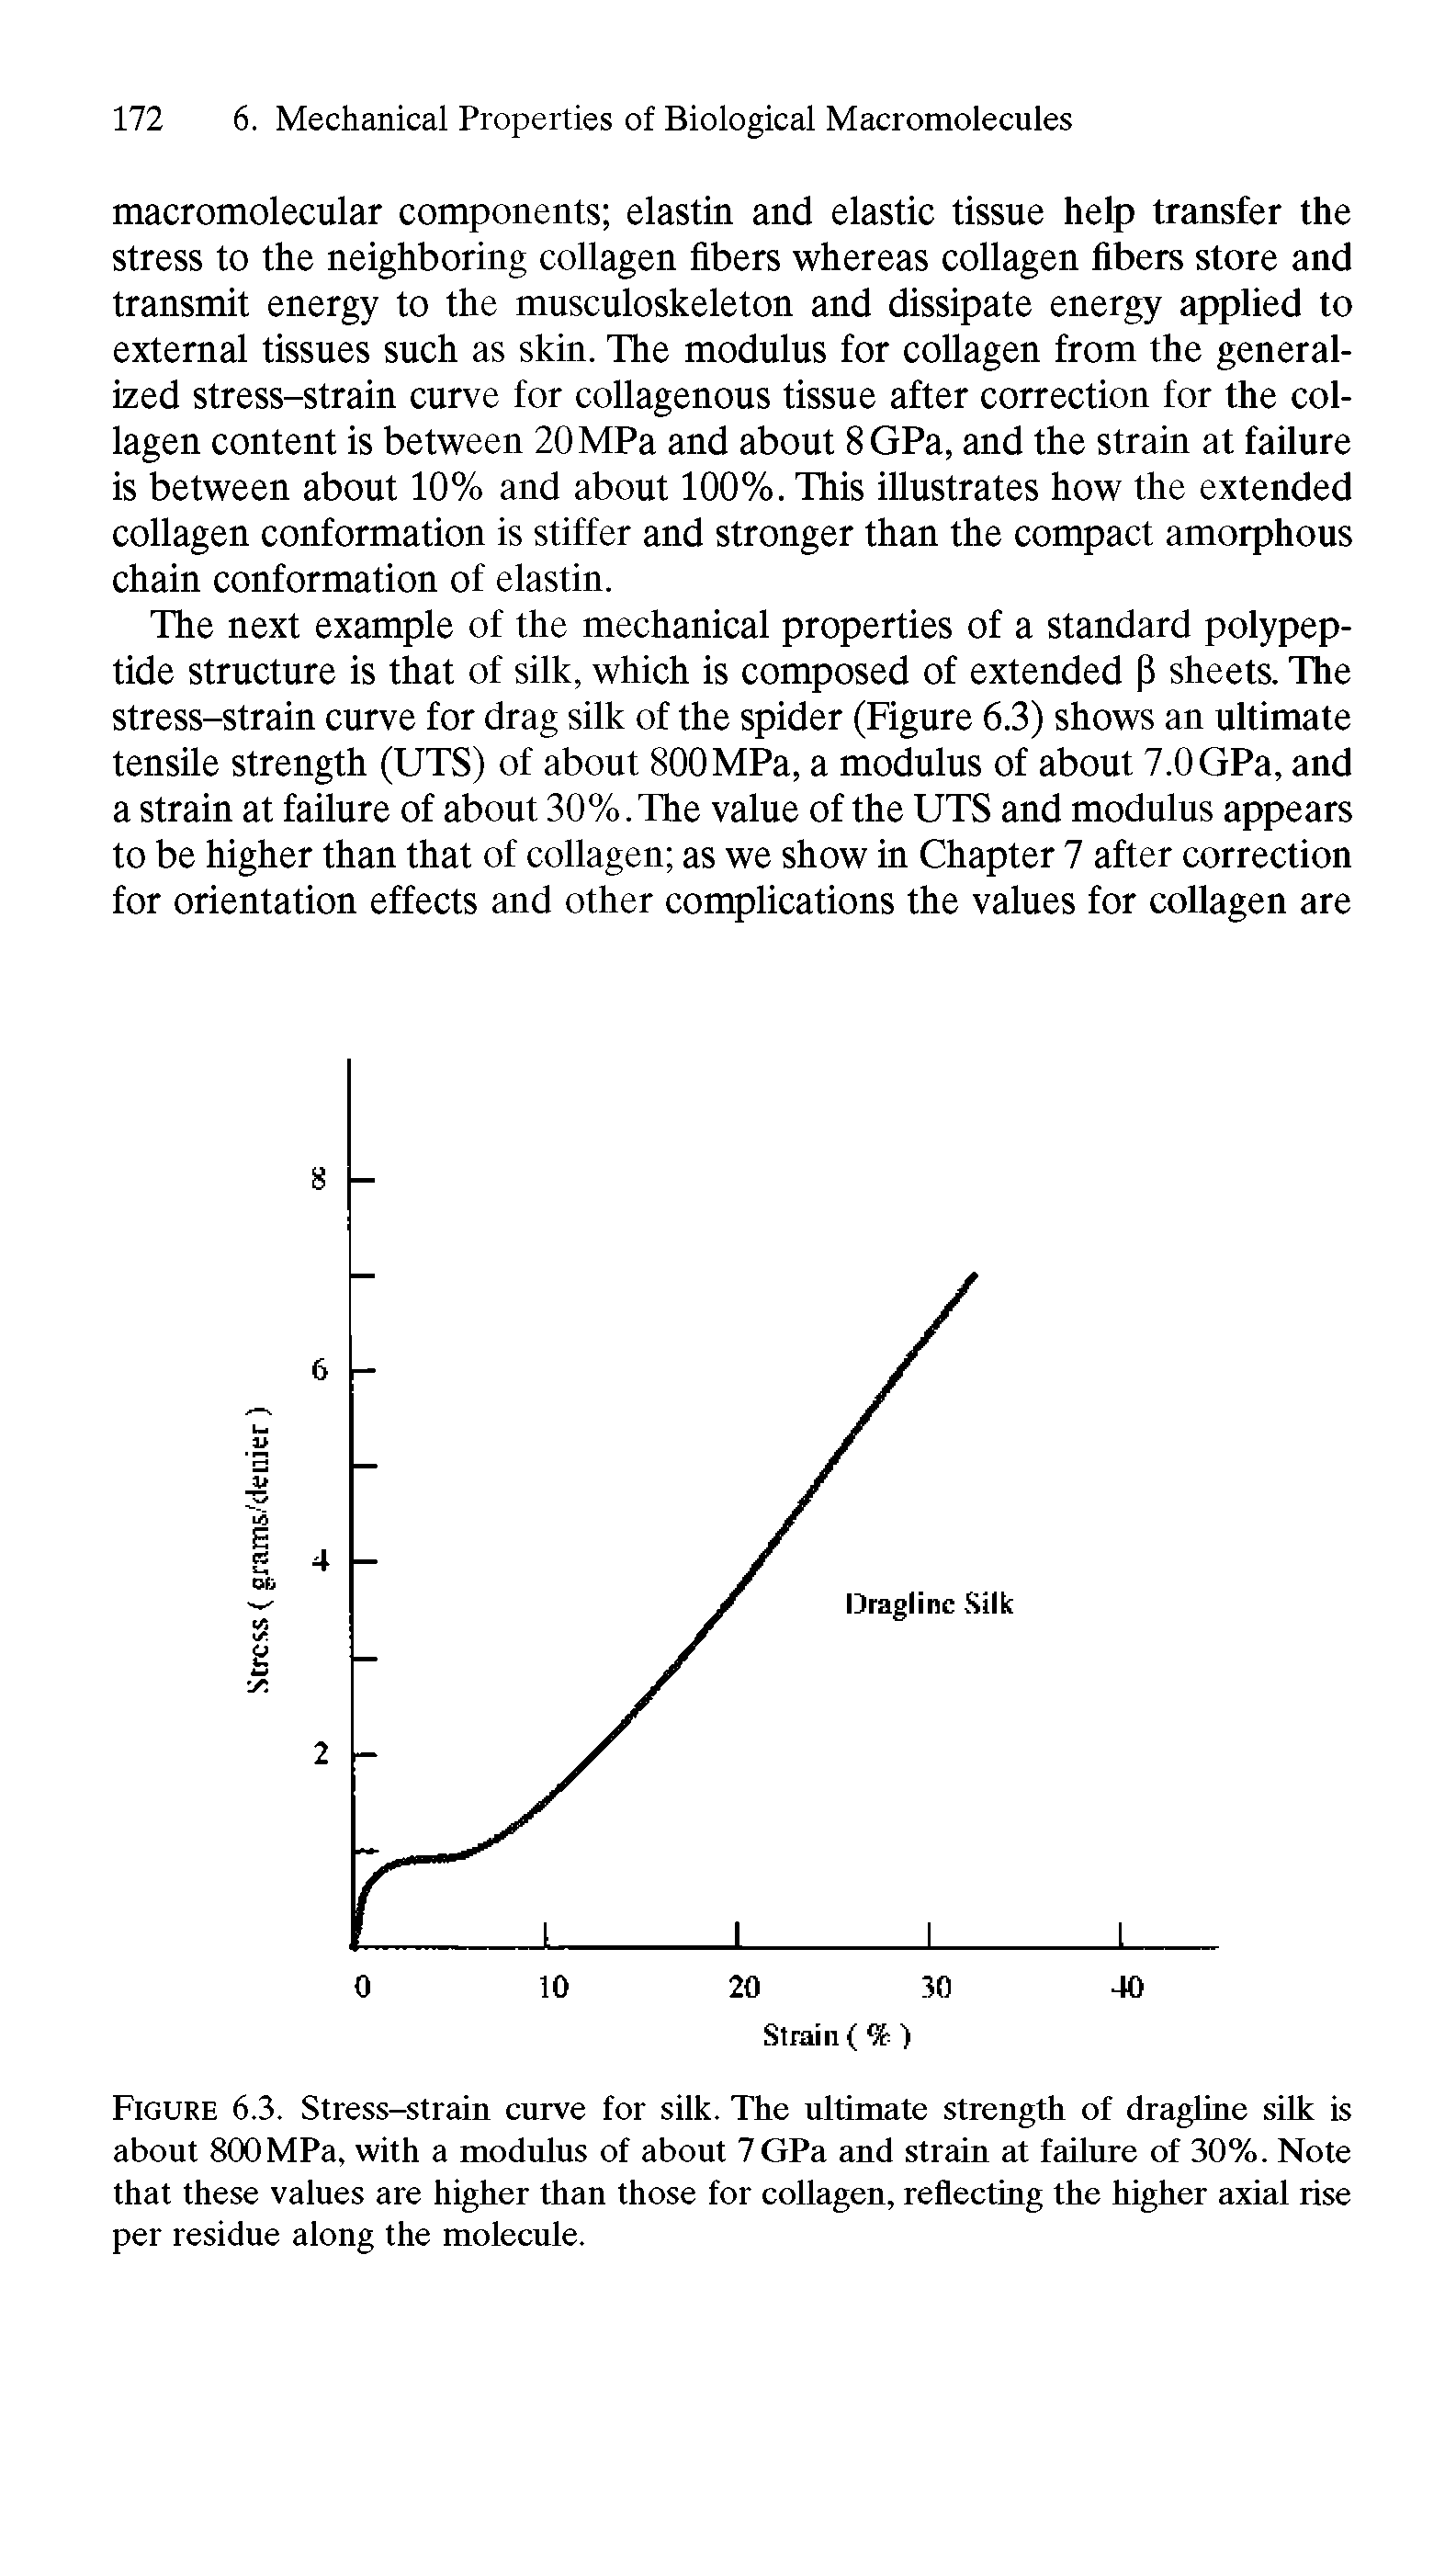 Figure 6.3. Stress-strain curve for silk. The ultimate strength of dragline silk is about 800 MPa, with a modulus of about 7 GPa and strain at failure of 30%. Note that these values are higher than those for collagen, reflecting the higher axial rise per residue along the molecule.